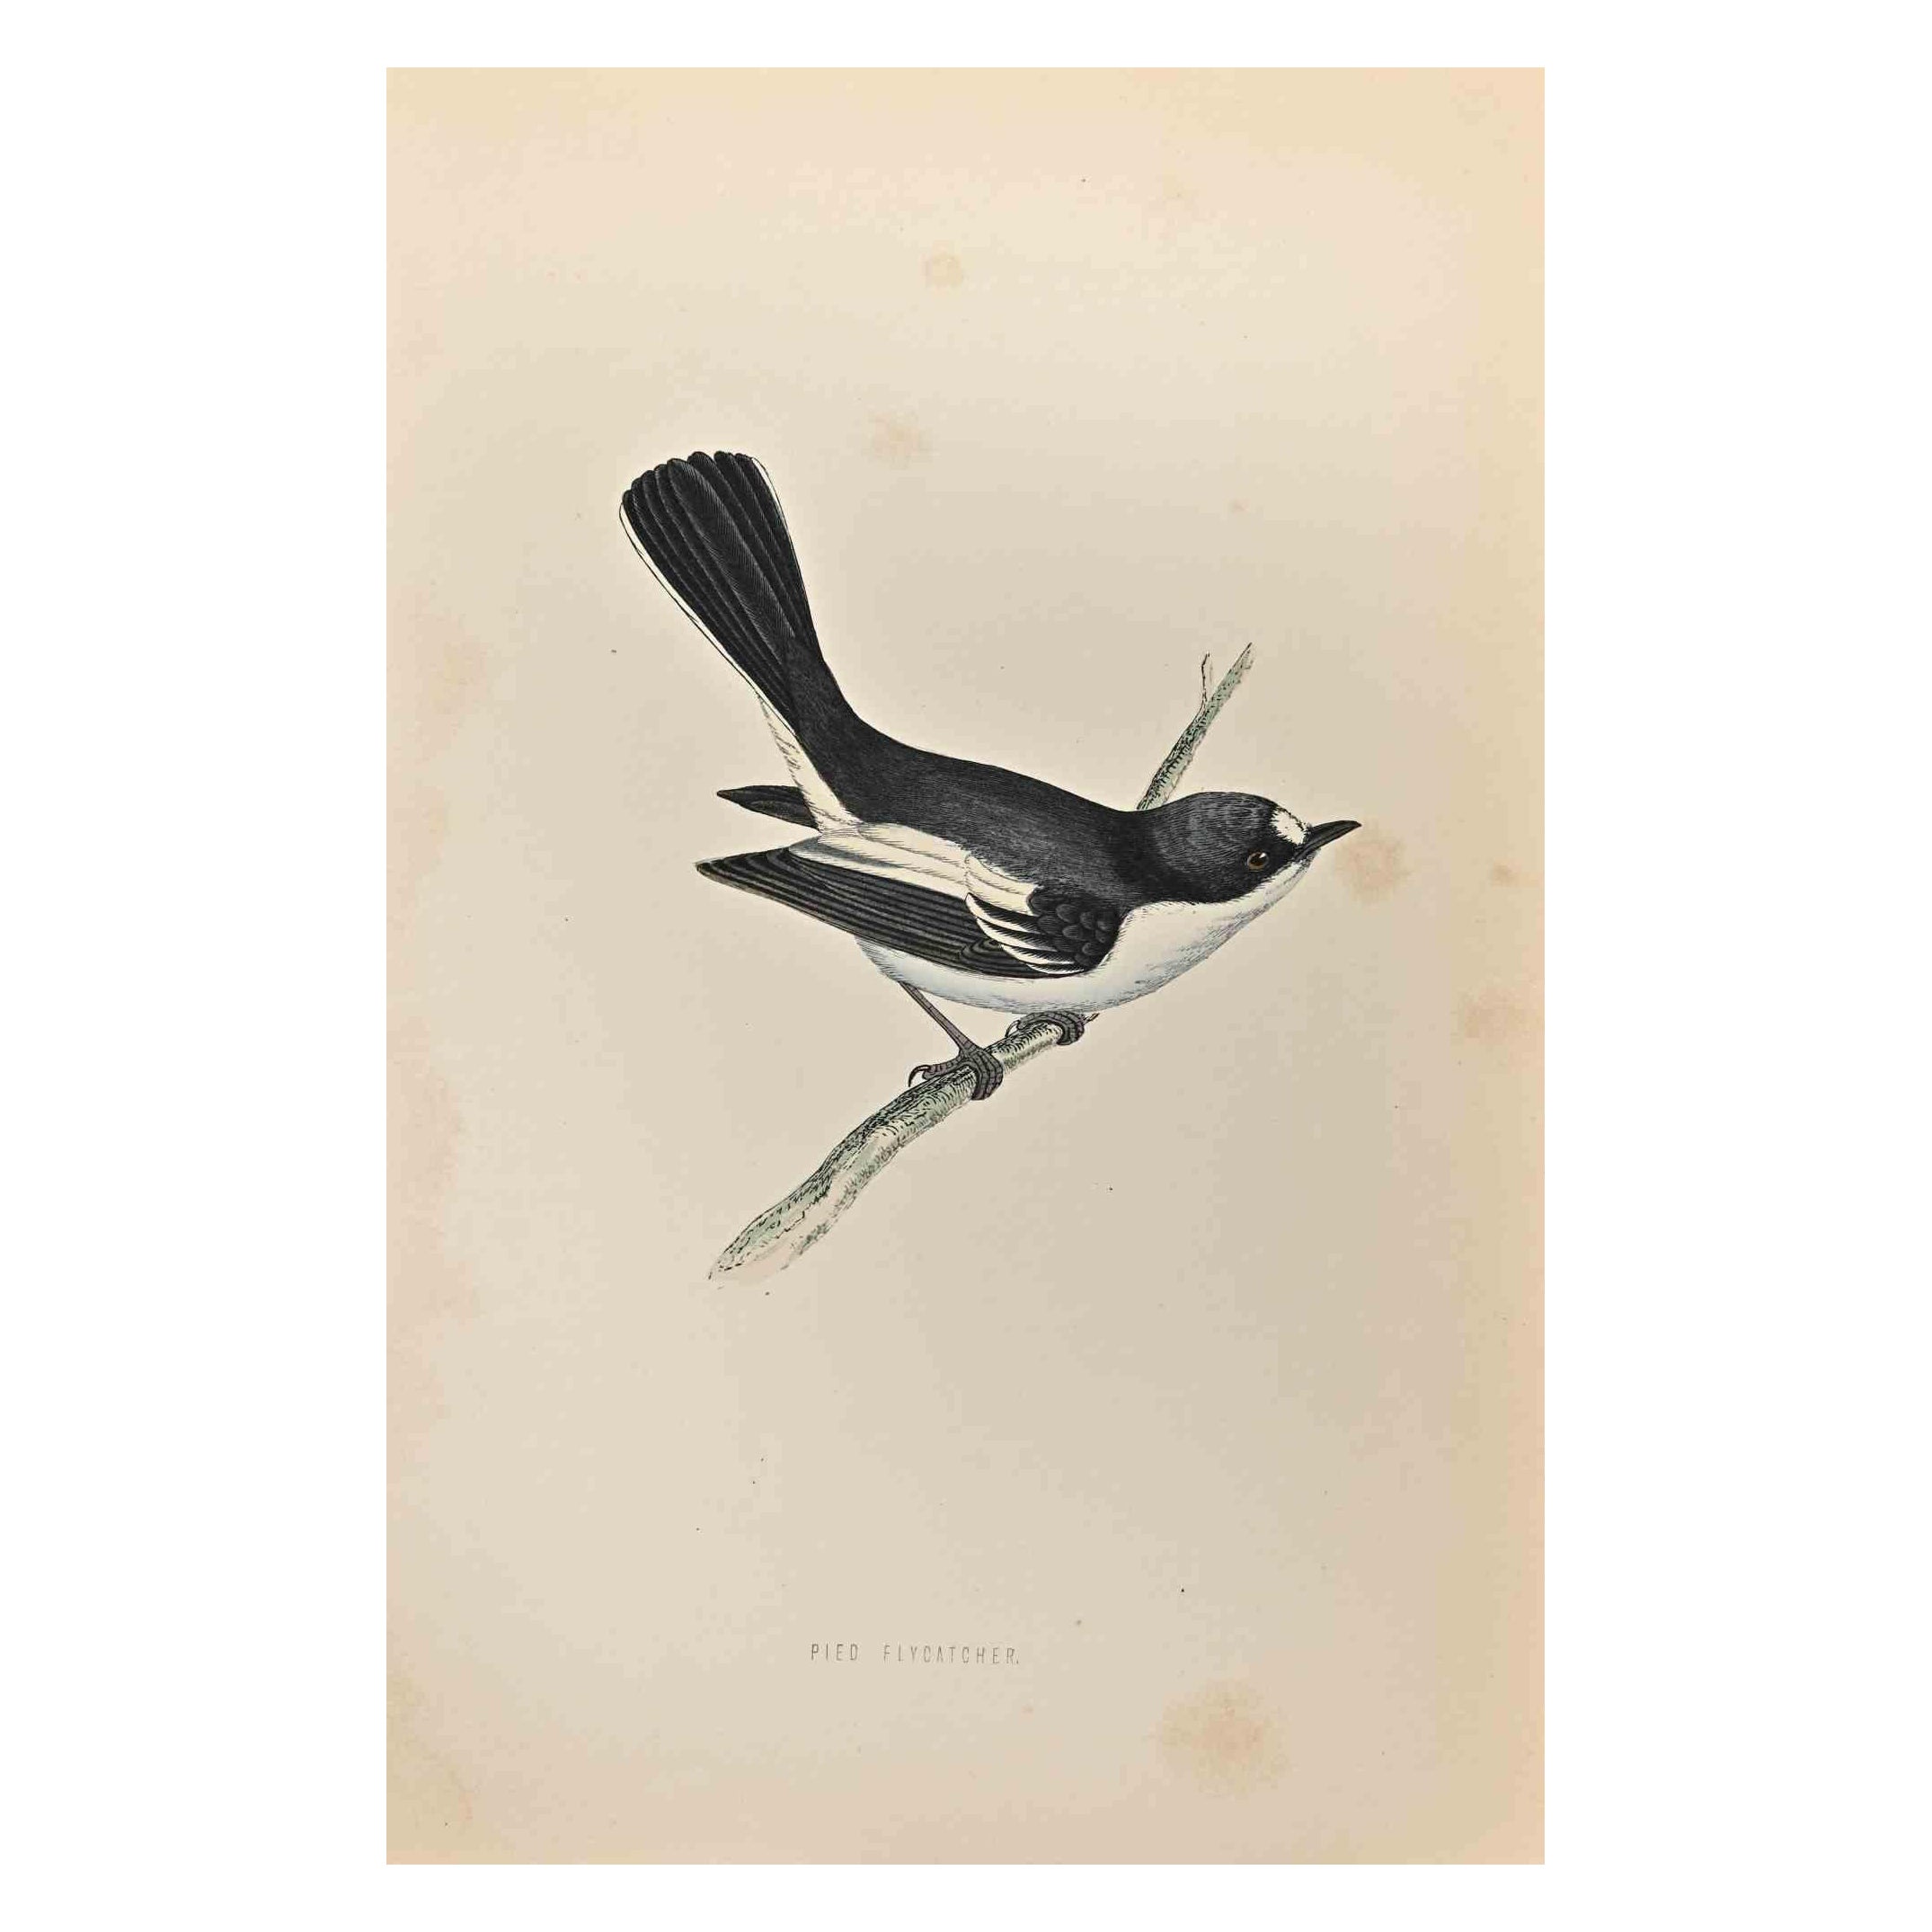 Pied Flycatcher is a modern artwork realized in 1870 by the British artist Alexander Francis Lydon (1836-1917).

Woodcut print on ivory-colored paper.

Hand-colored, published by London, Bell & Sons, 1870.  

The name of the bird is printed on the